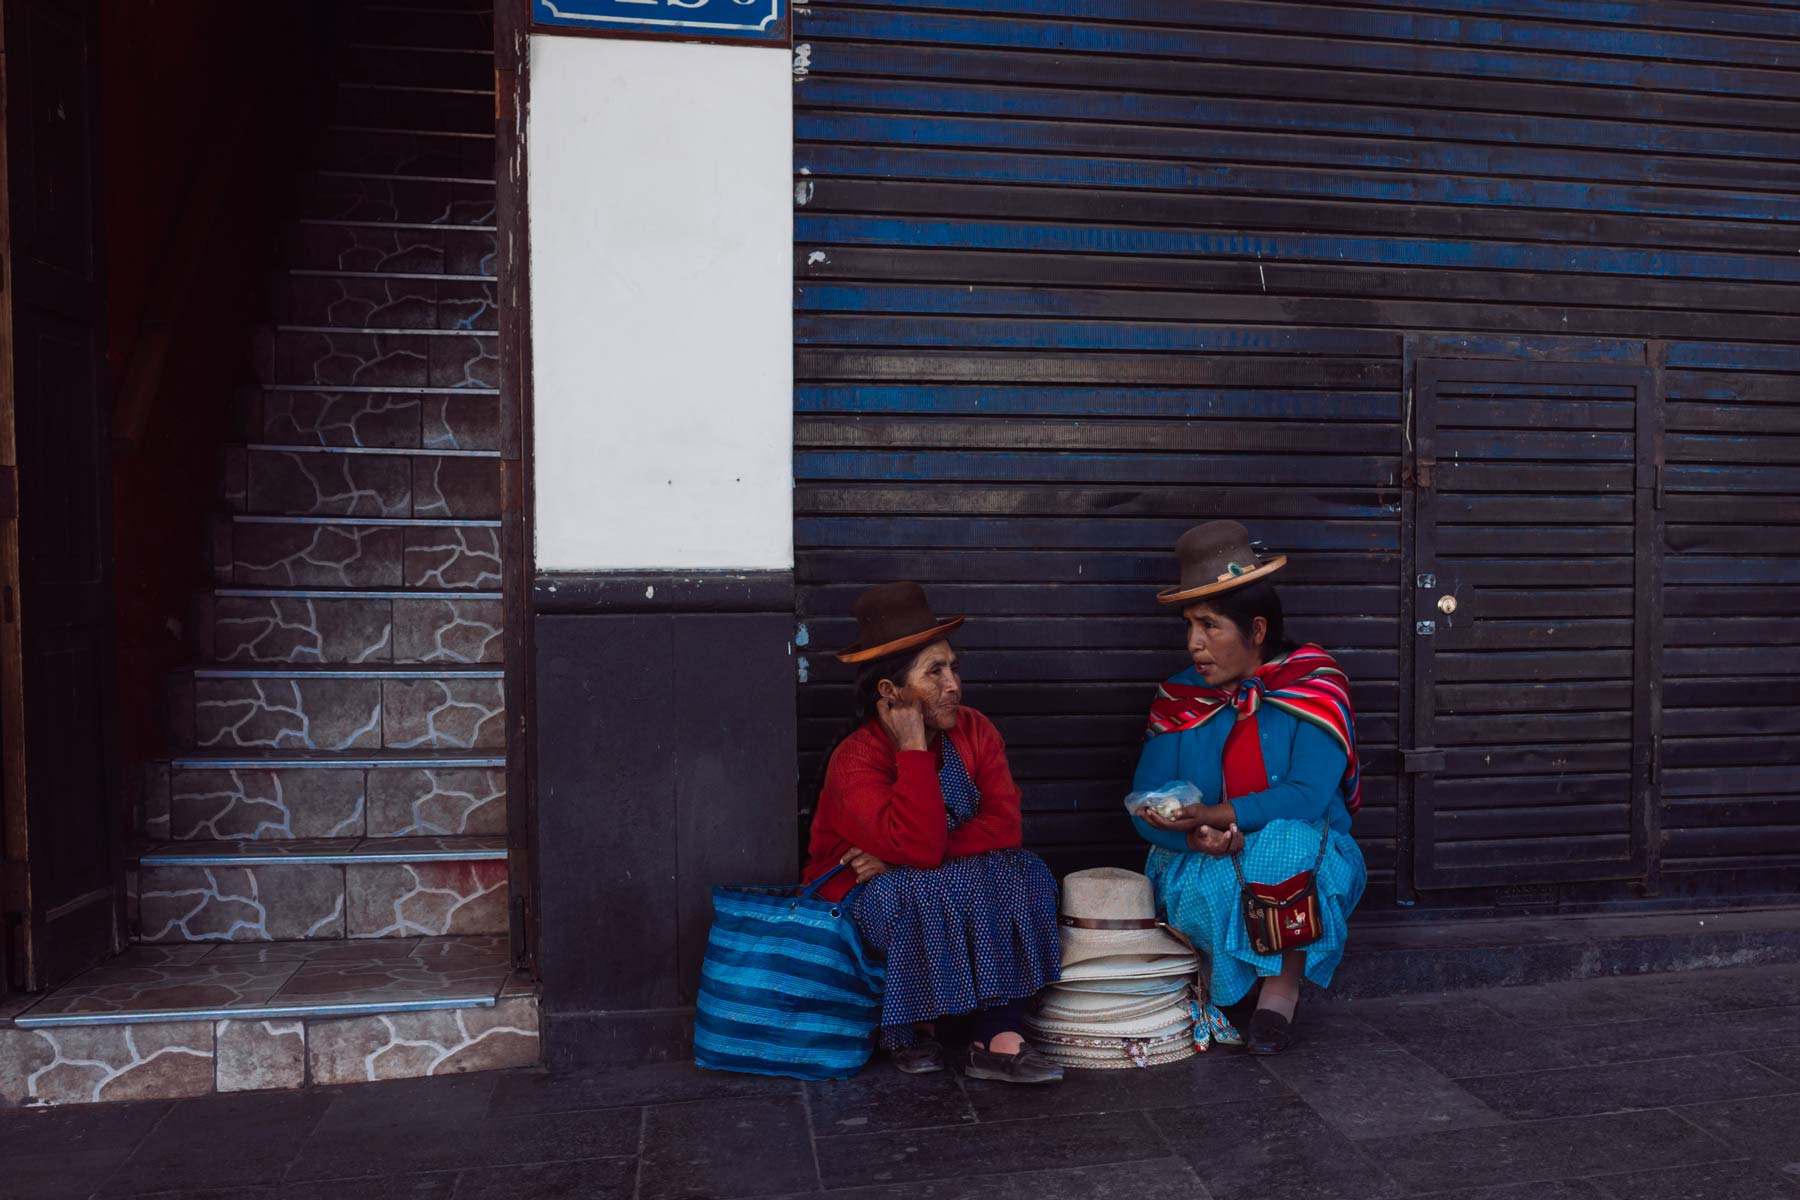 Two woman sharing food and conversation during lunchtime in Arequipa.